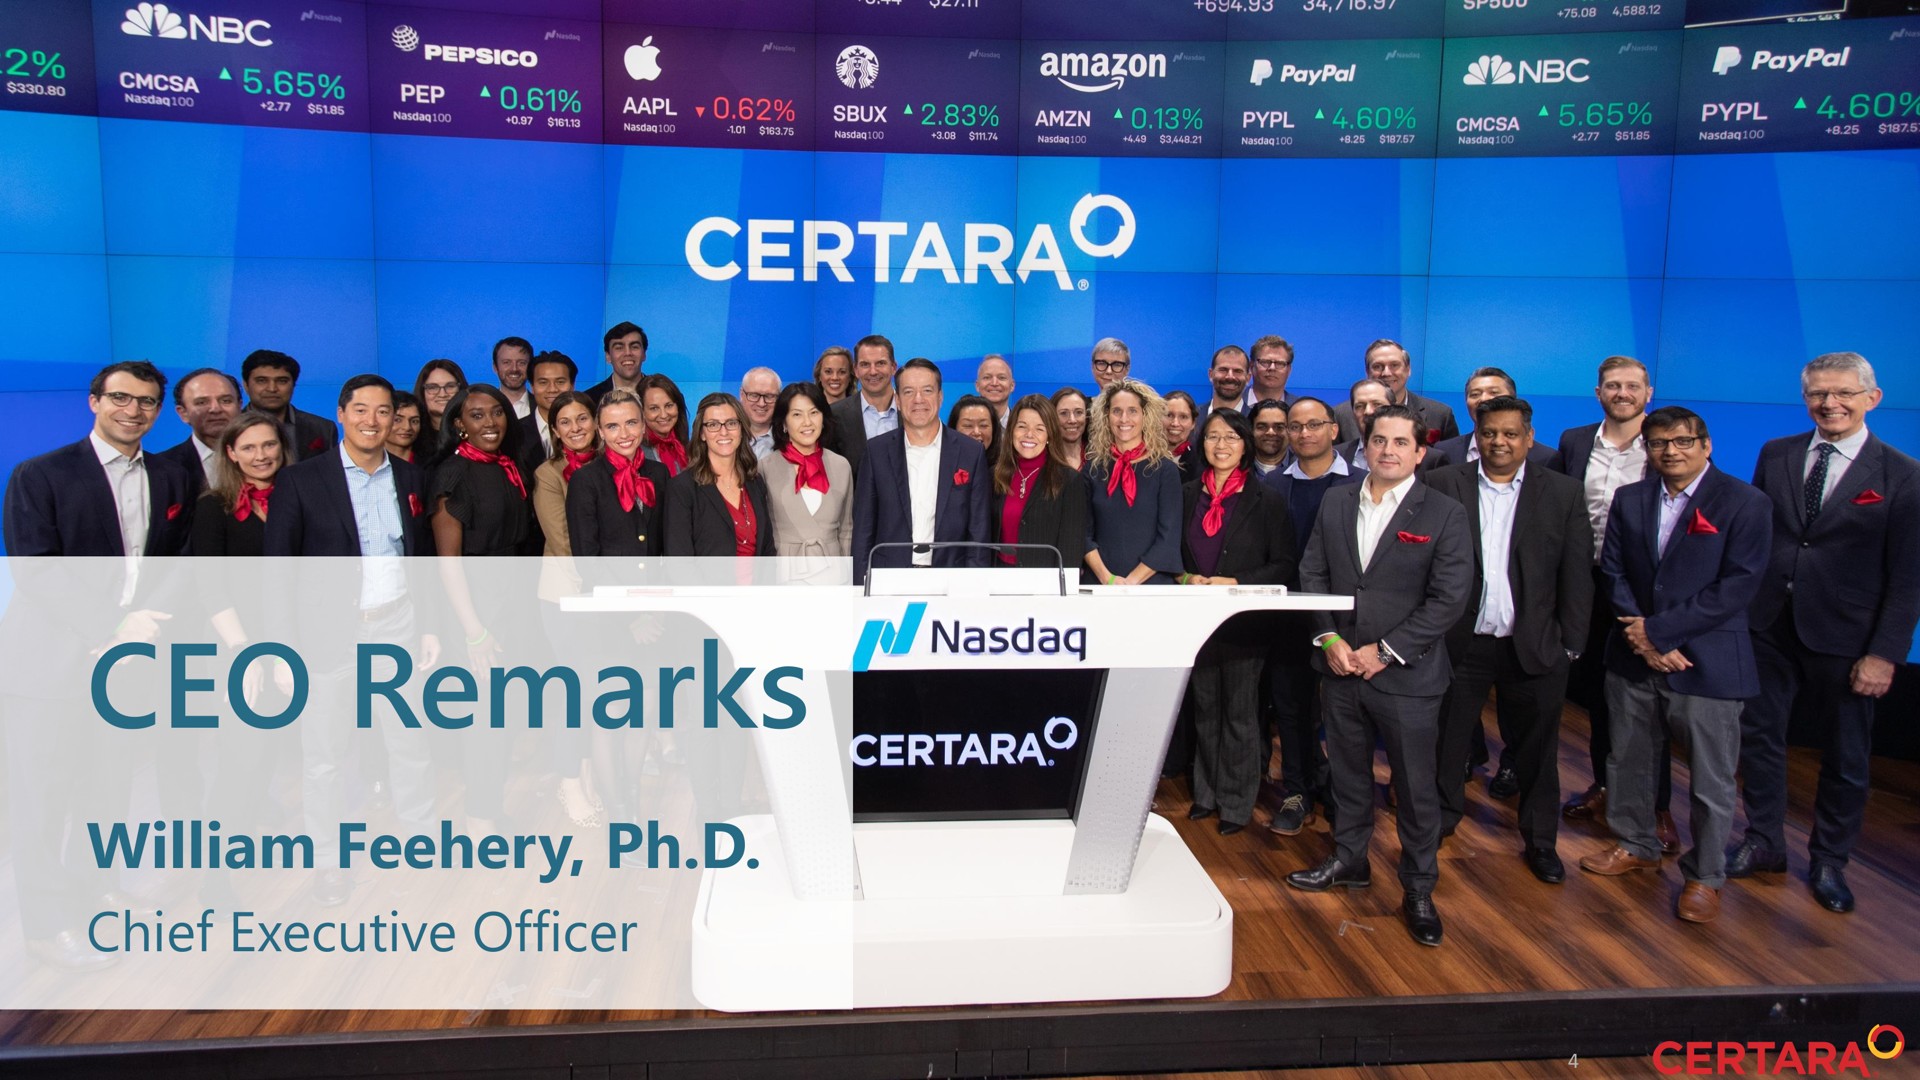 remarks remarks chief executive officer chief executive officer a | Certara